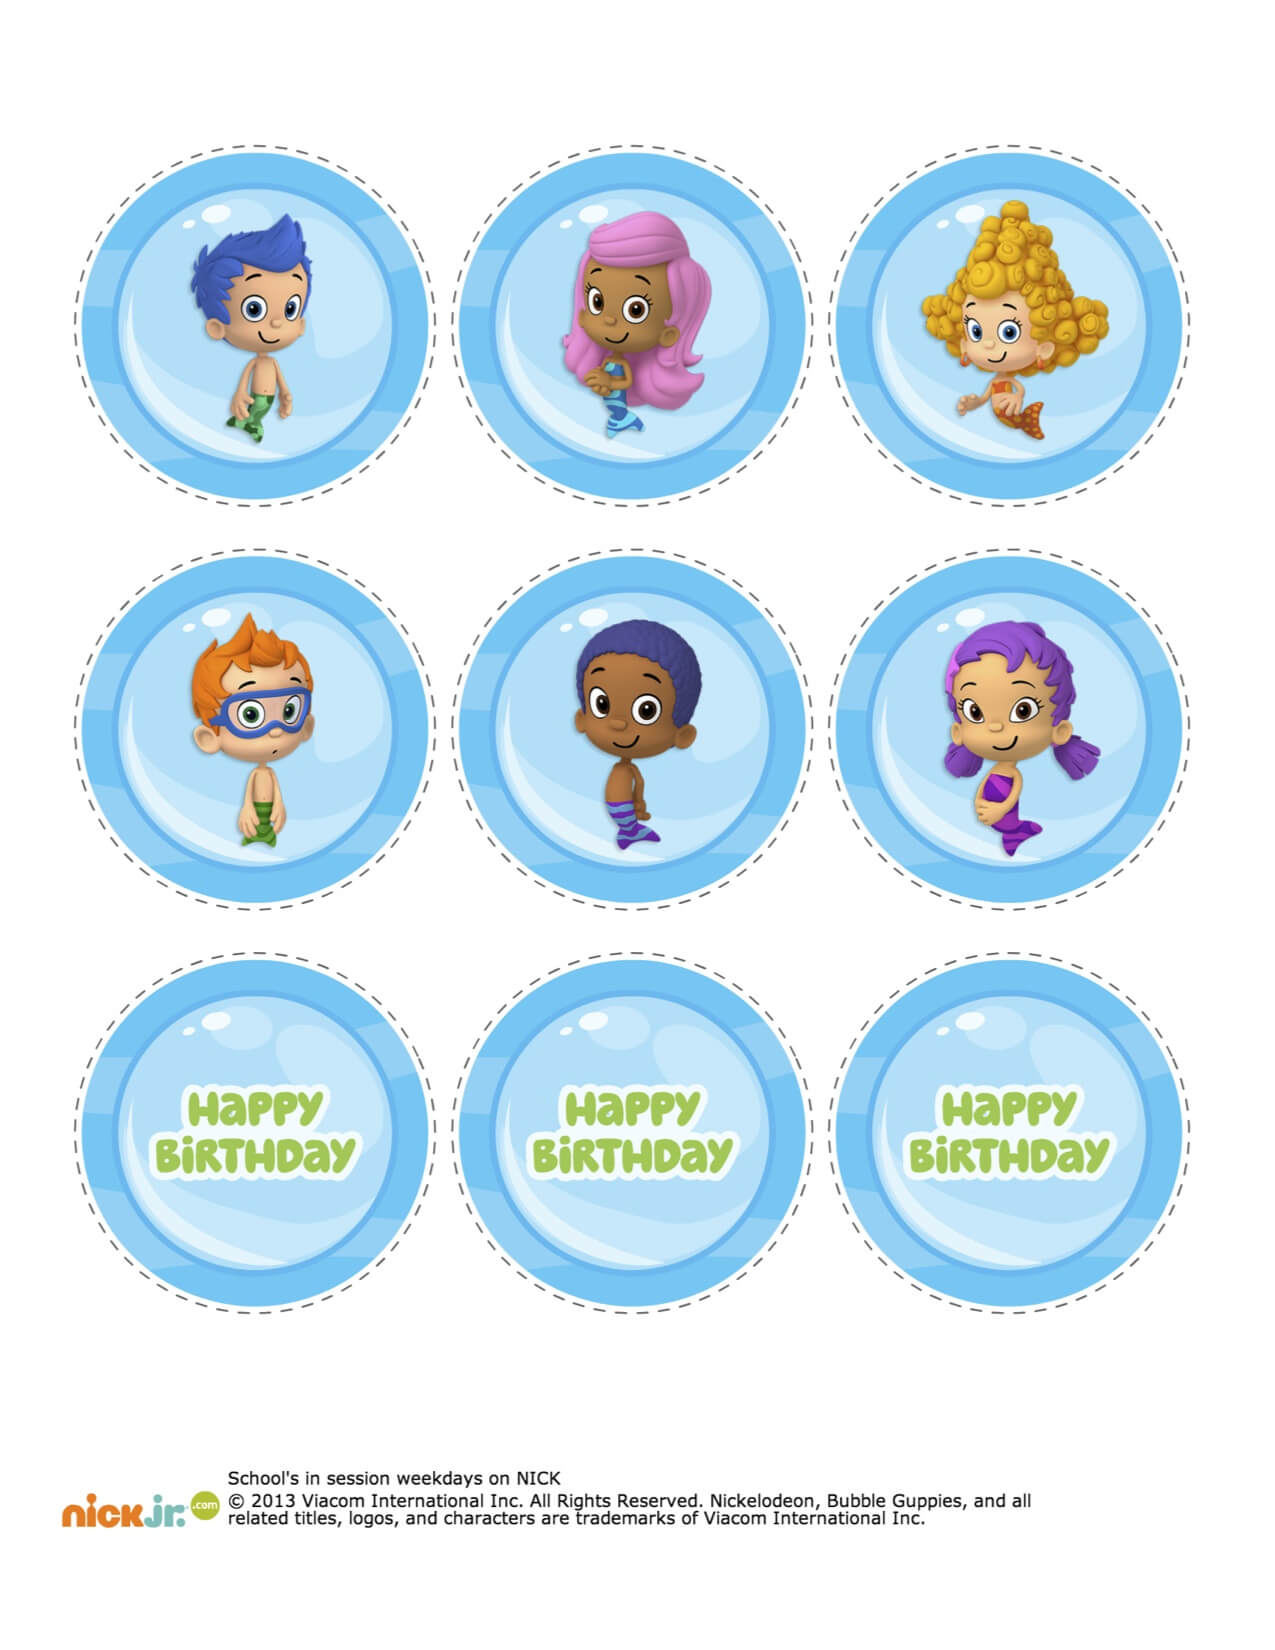 Bubble Guppies Birthday Banner Template – Atlantaauctionco For Bubble Guppies Birthday Banner Template